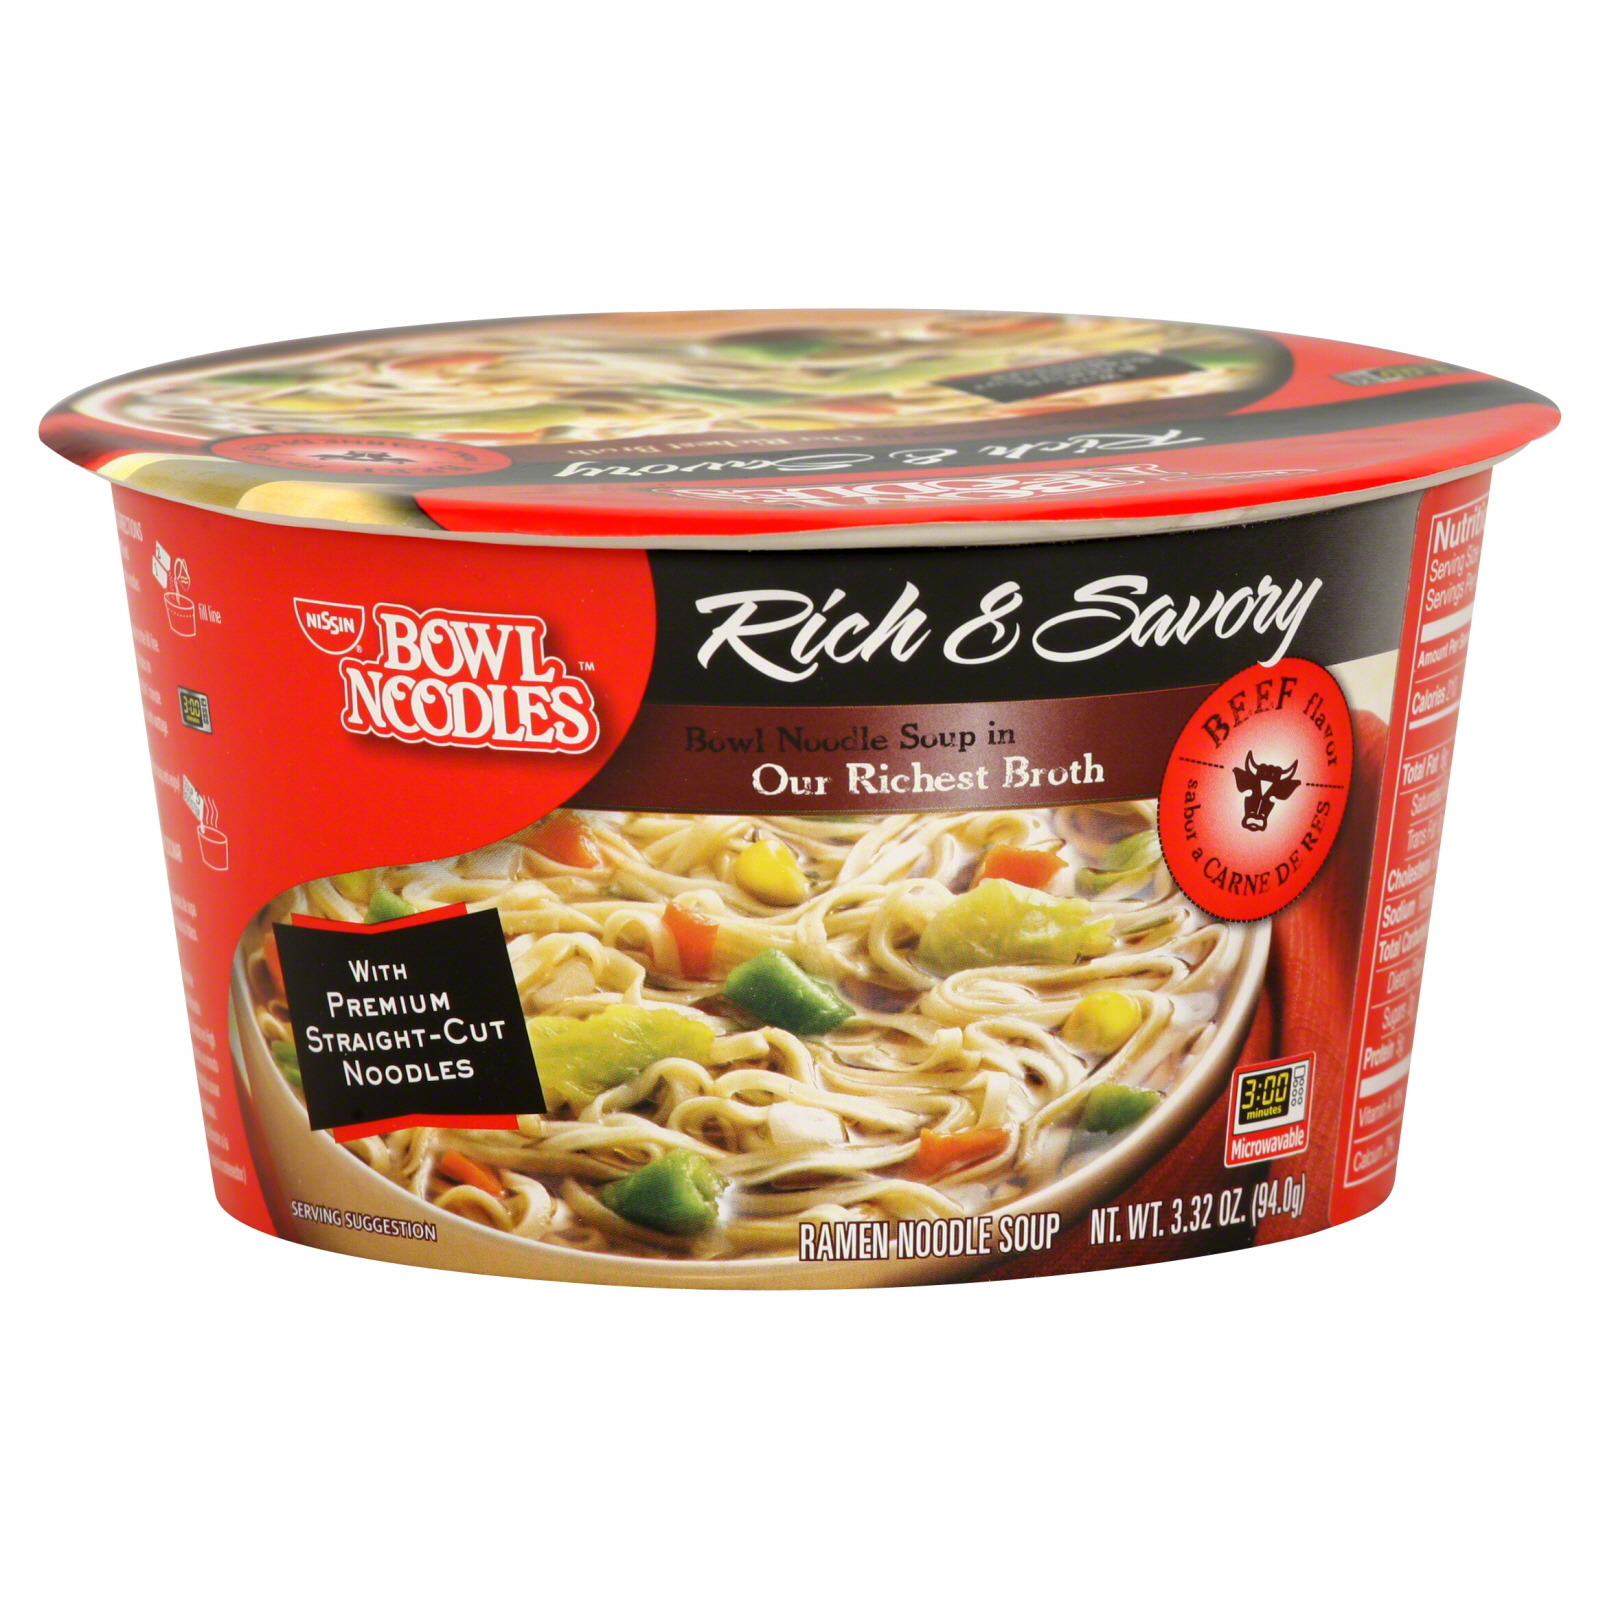 Nissin Original Chow Mein Noodles Only $0.13 at Publix Starting 11/7